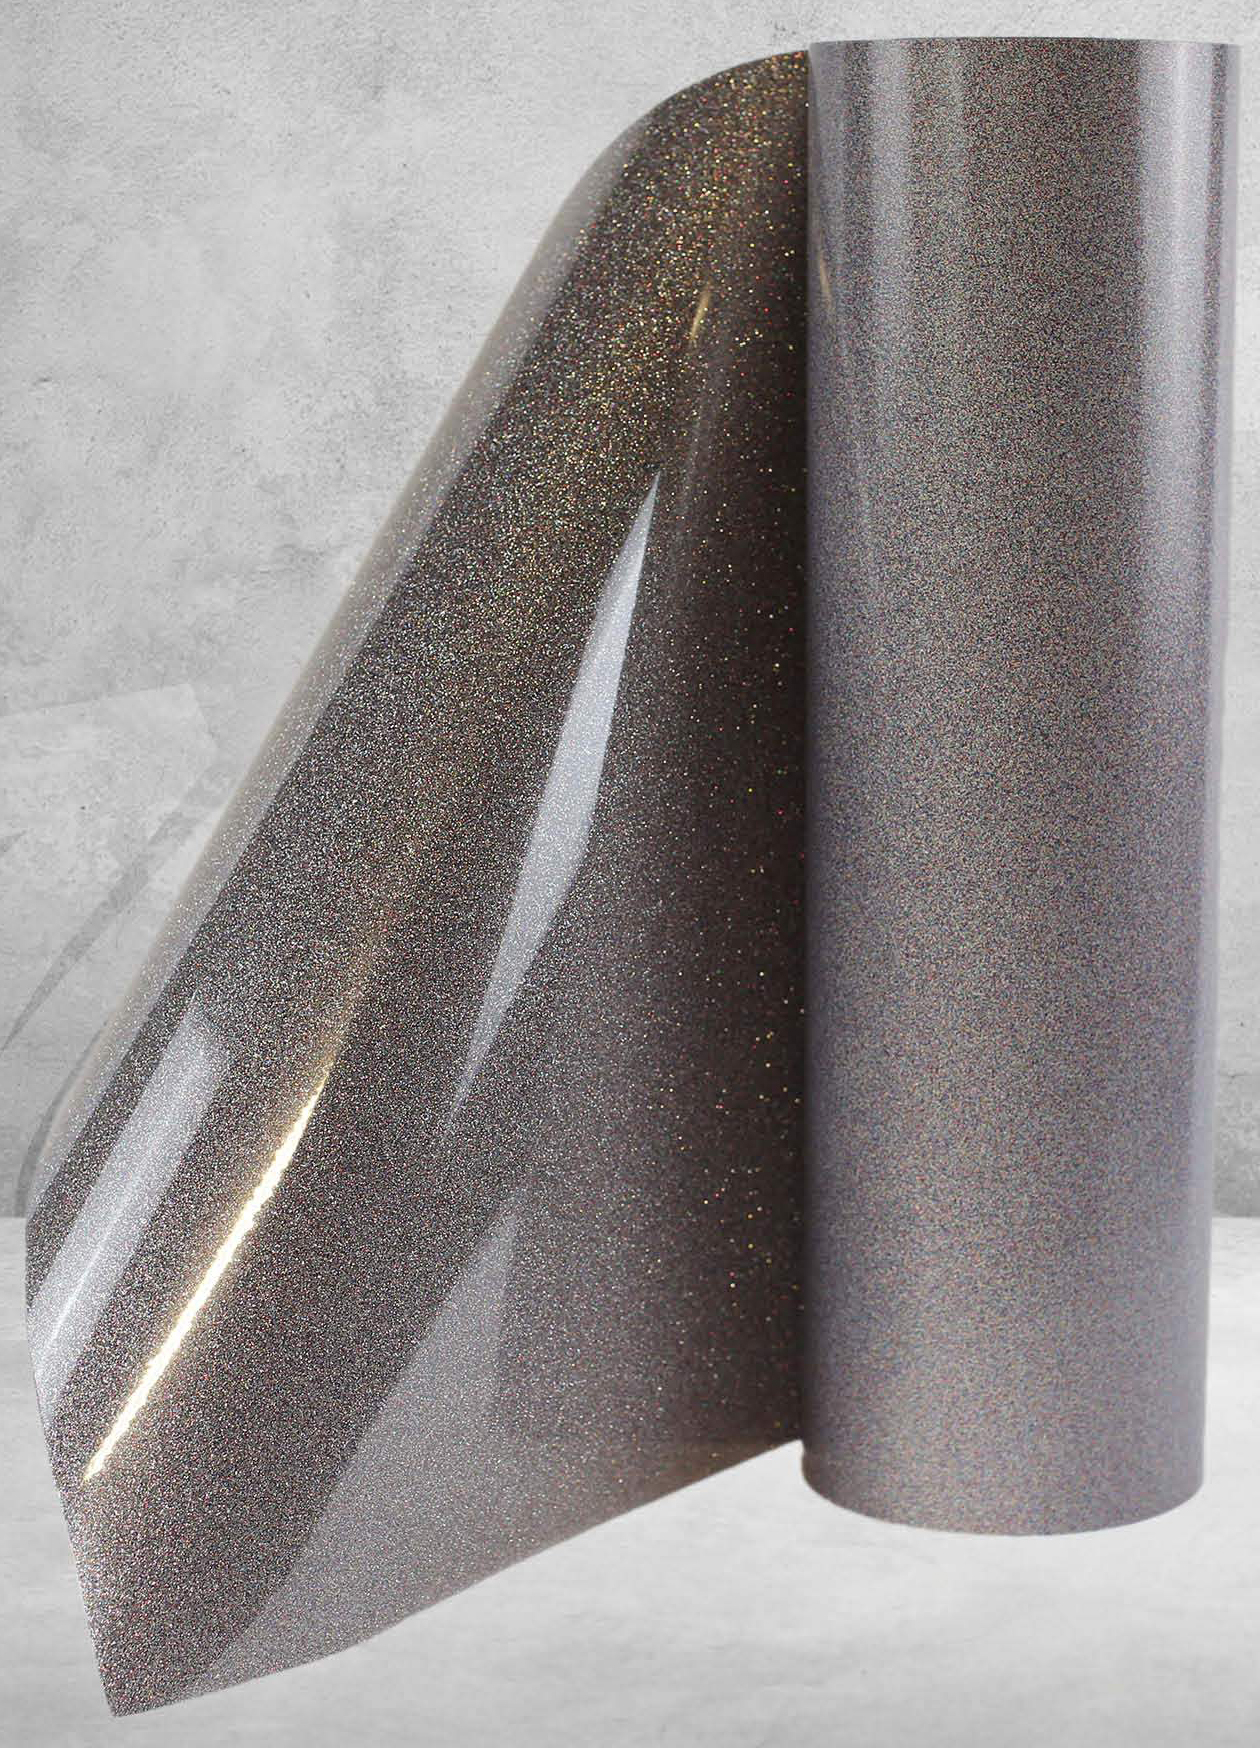 Shop Specialty Materials 12 Glitterflex Ultra Silver at   - Get High-Quality Heat Transfer Vinyl Today!